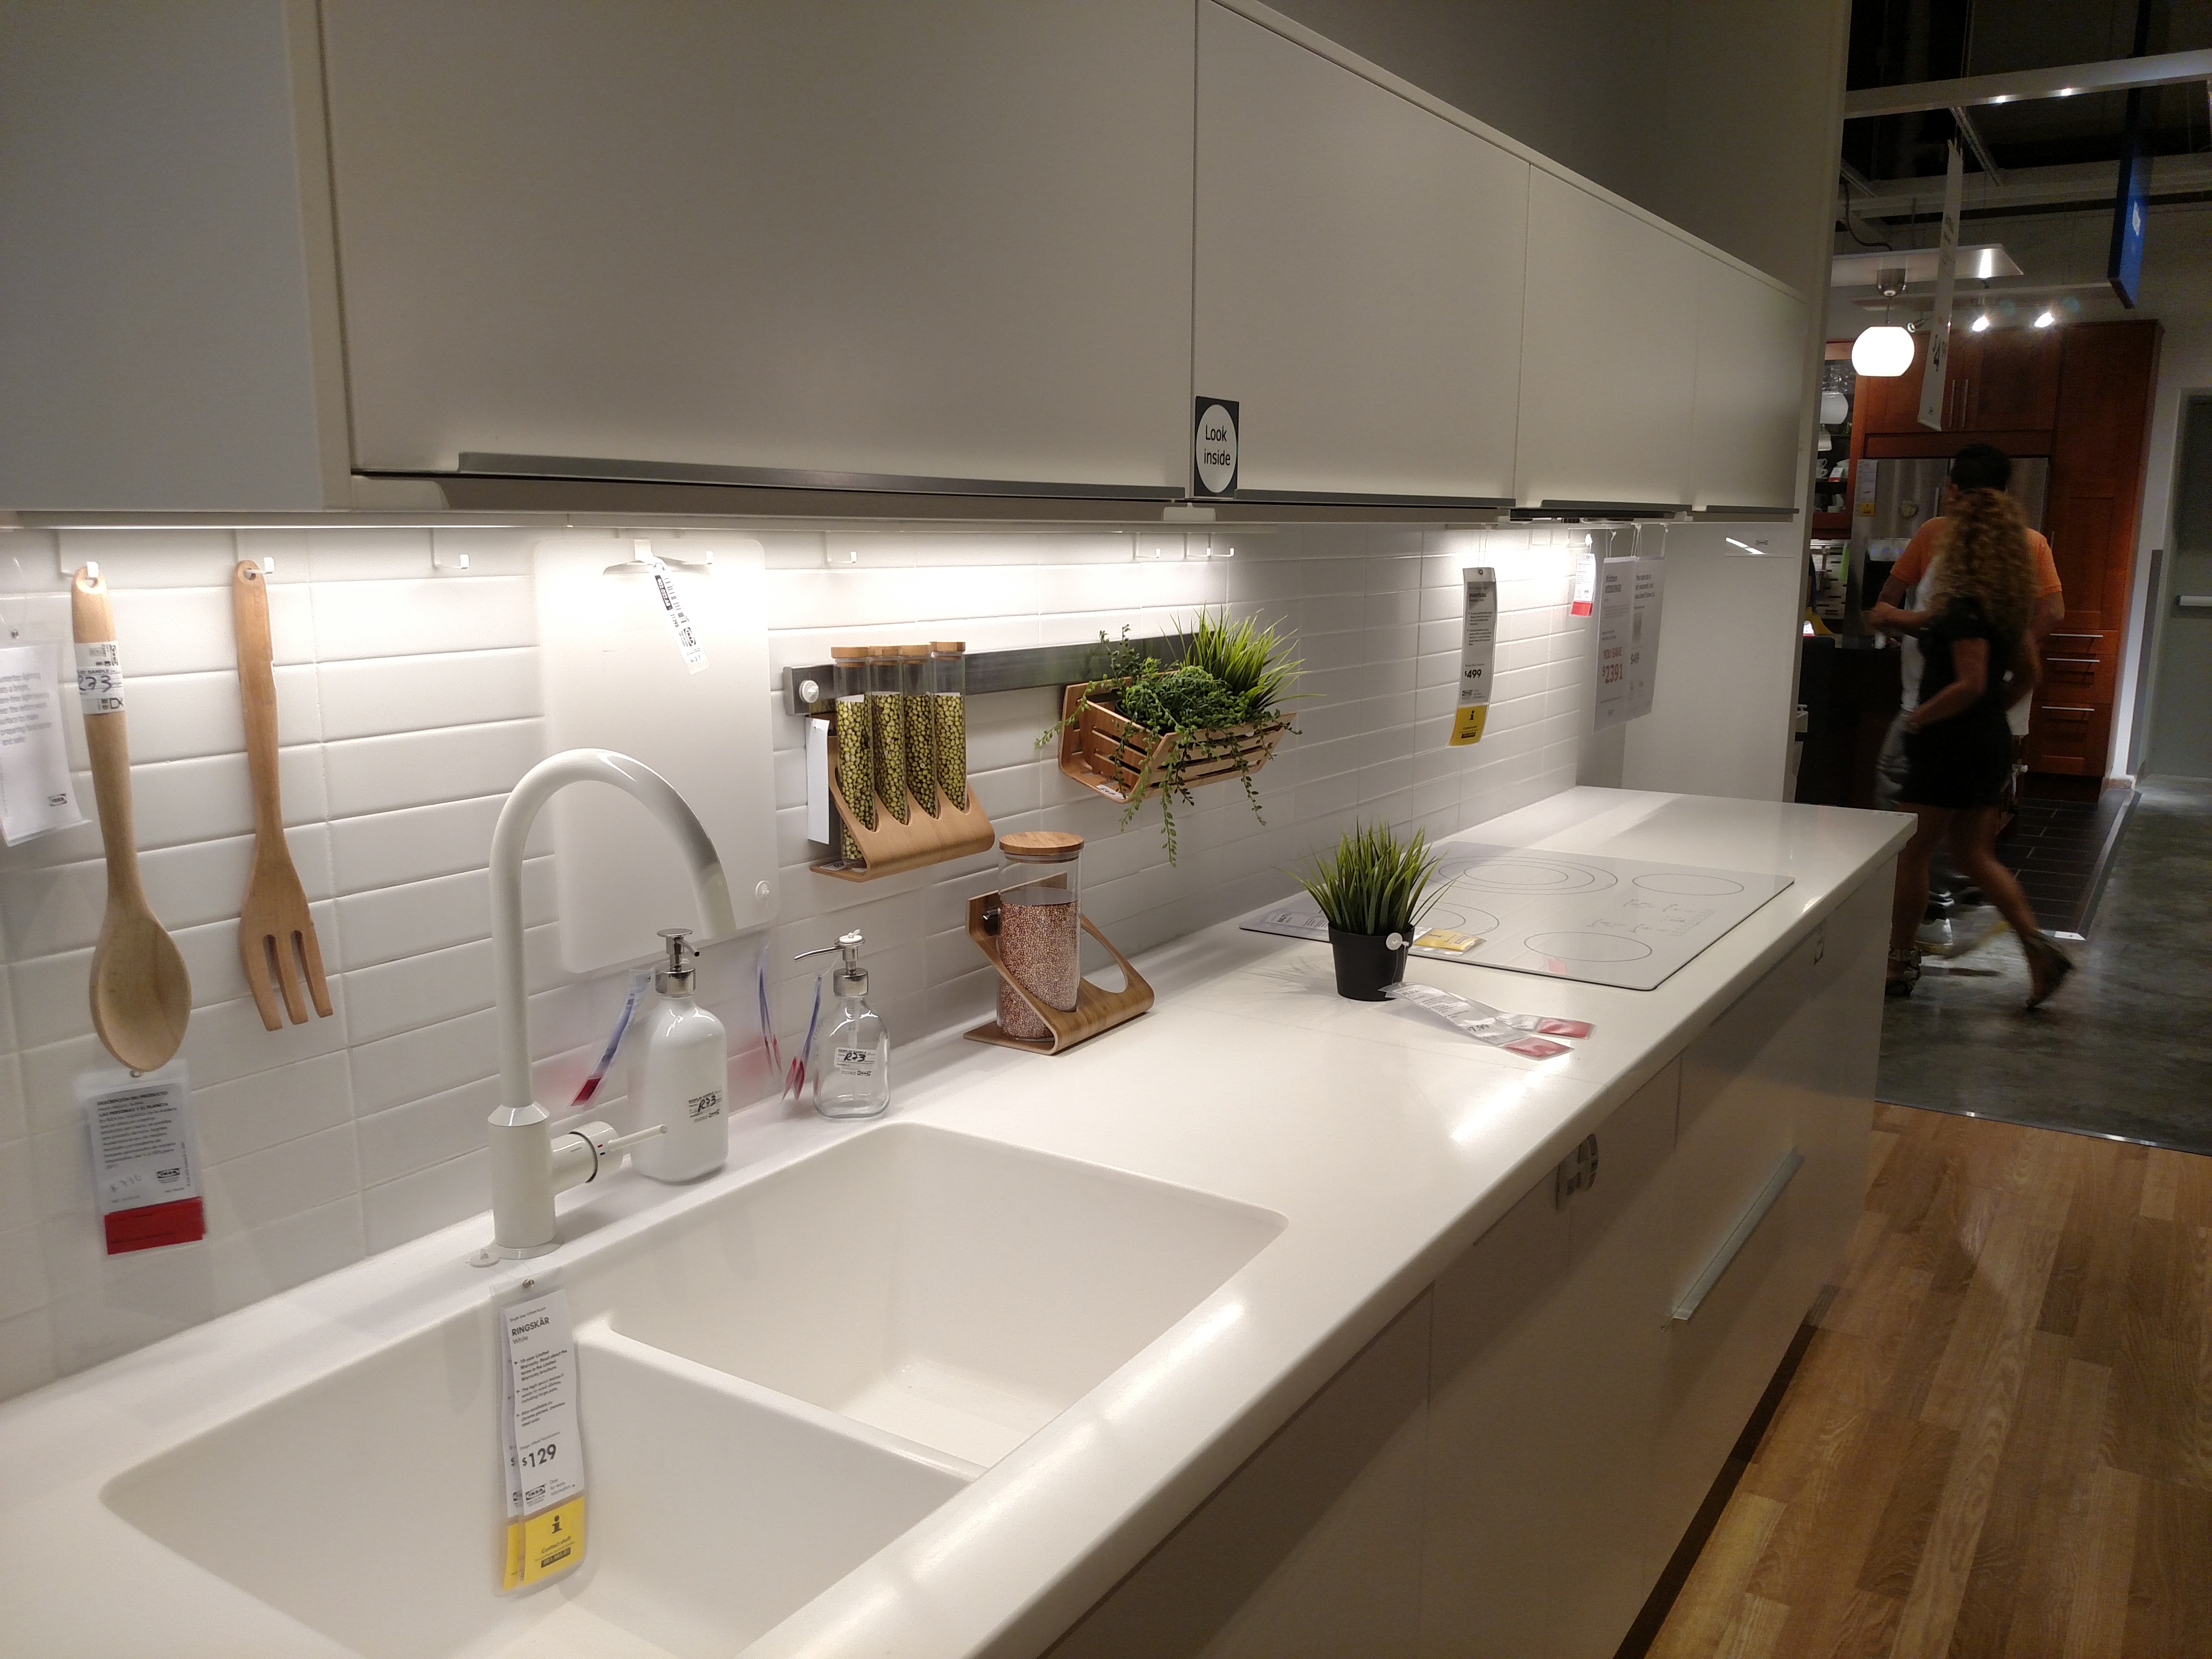 ikea sink kitchen integrated acrylic countertop personlig backsplash faucet countertops sinks invisible against showroom base lines kitchens disappear almost worktops